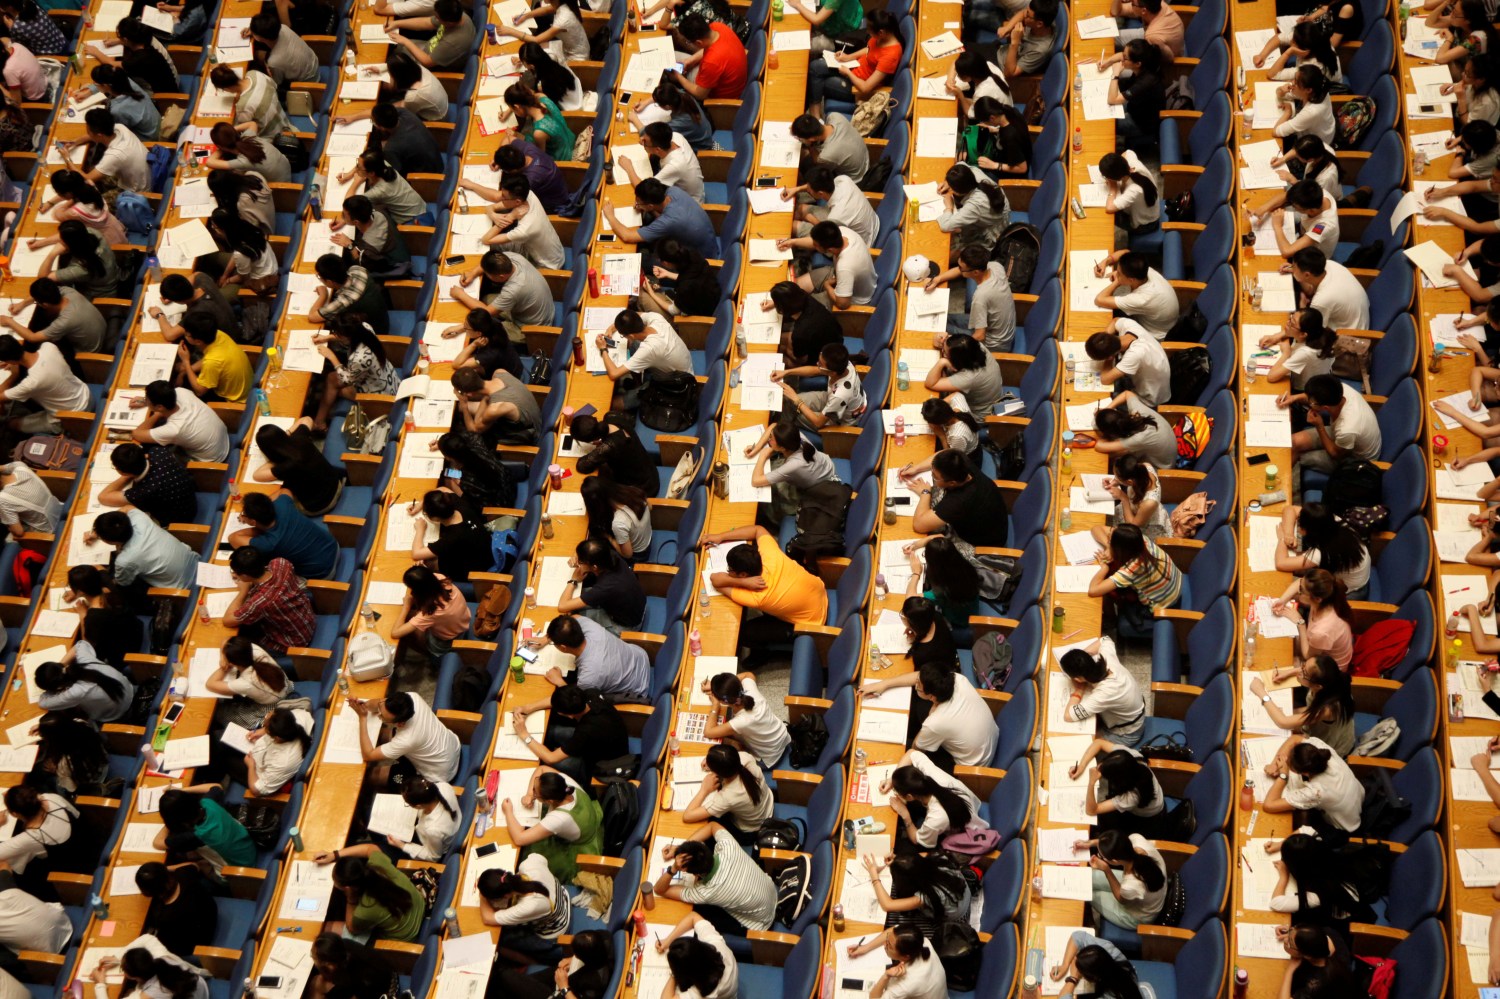 Students attend a lecture for the entrance exam for postgraduate studies at a hall in Jinan, Shandong